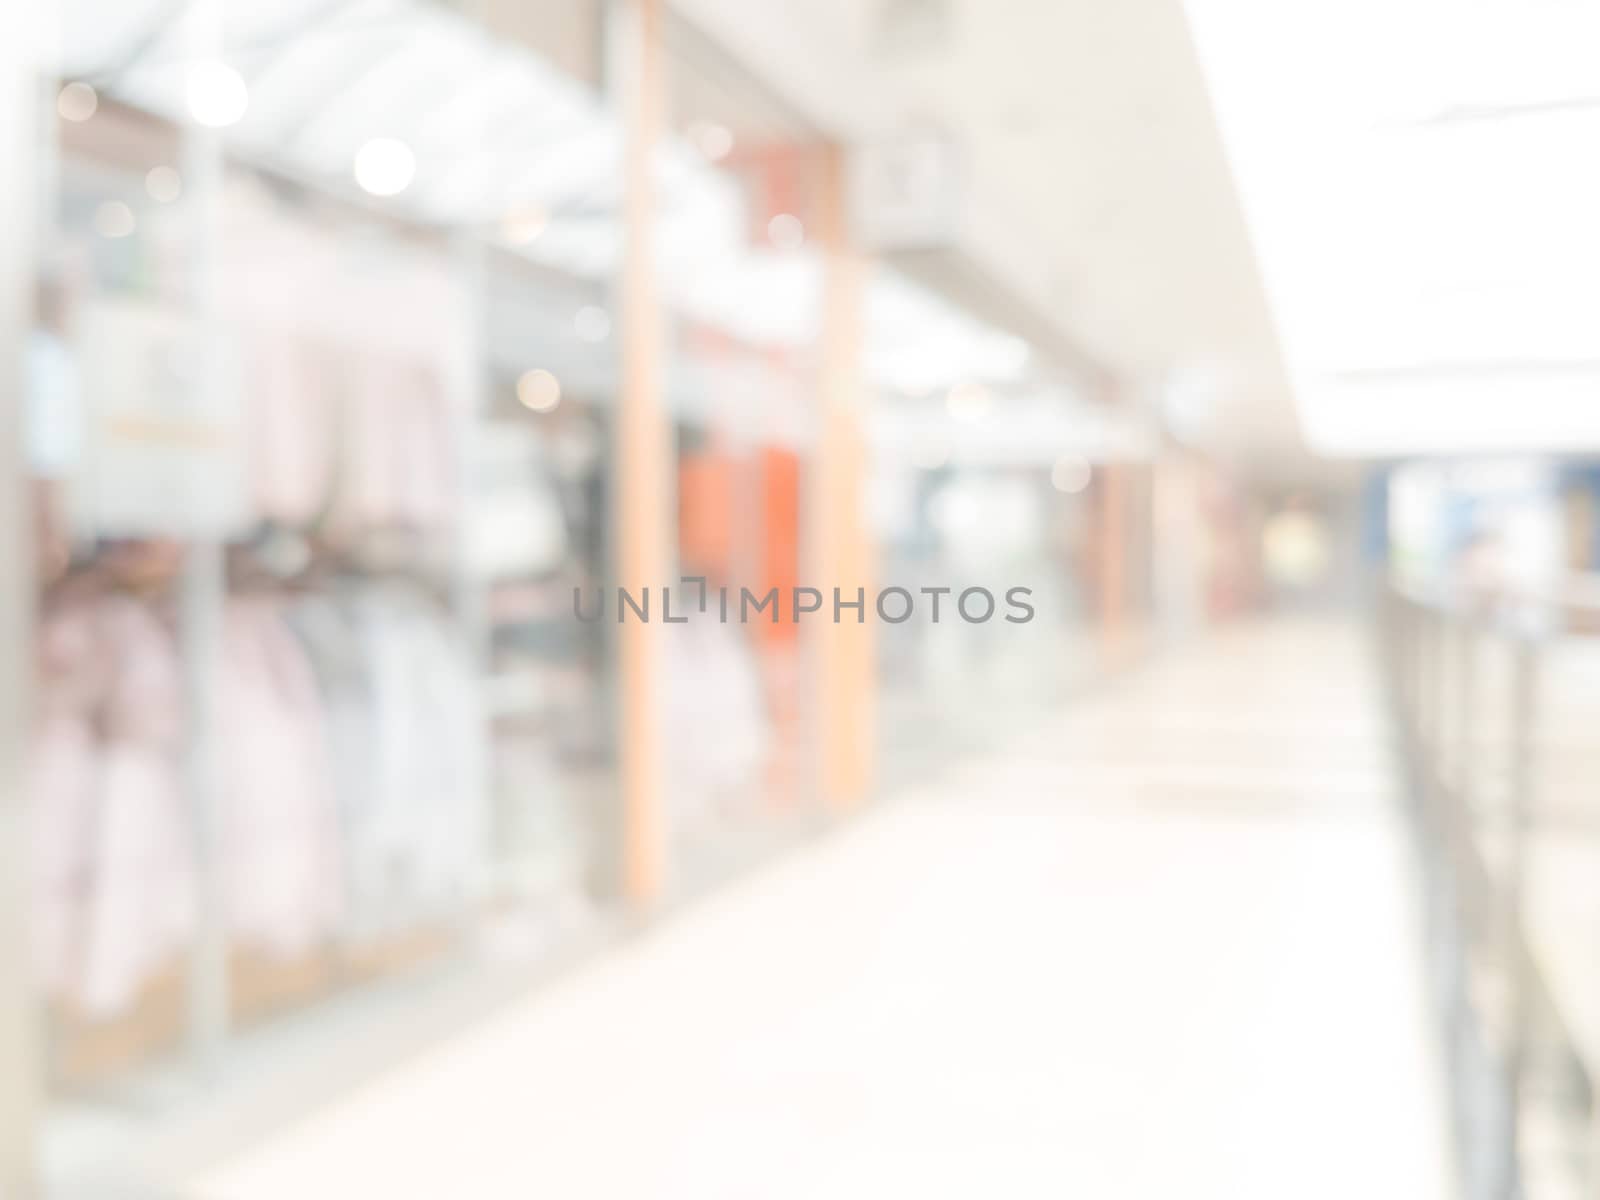 Beautifully blurred shopping center background with bokeh effect